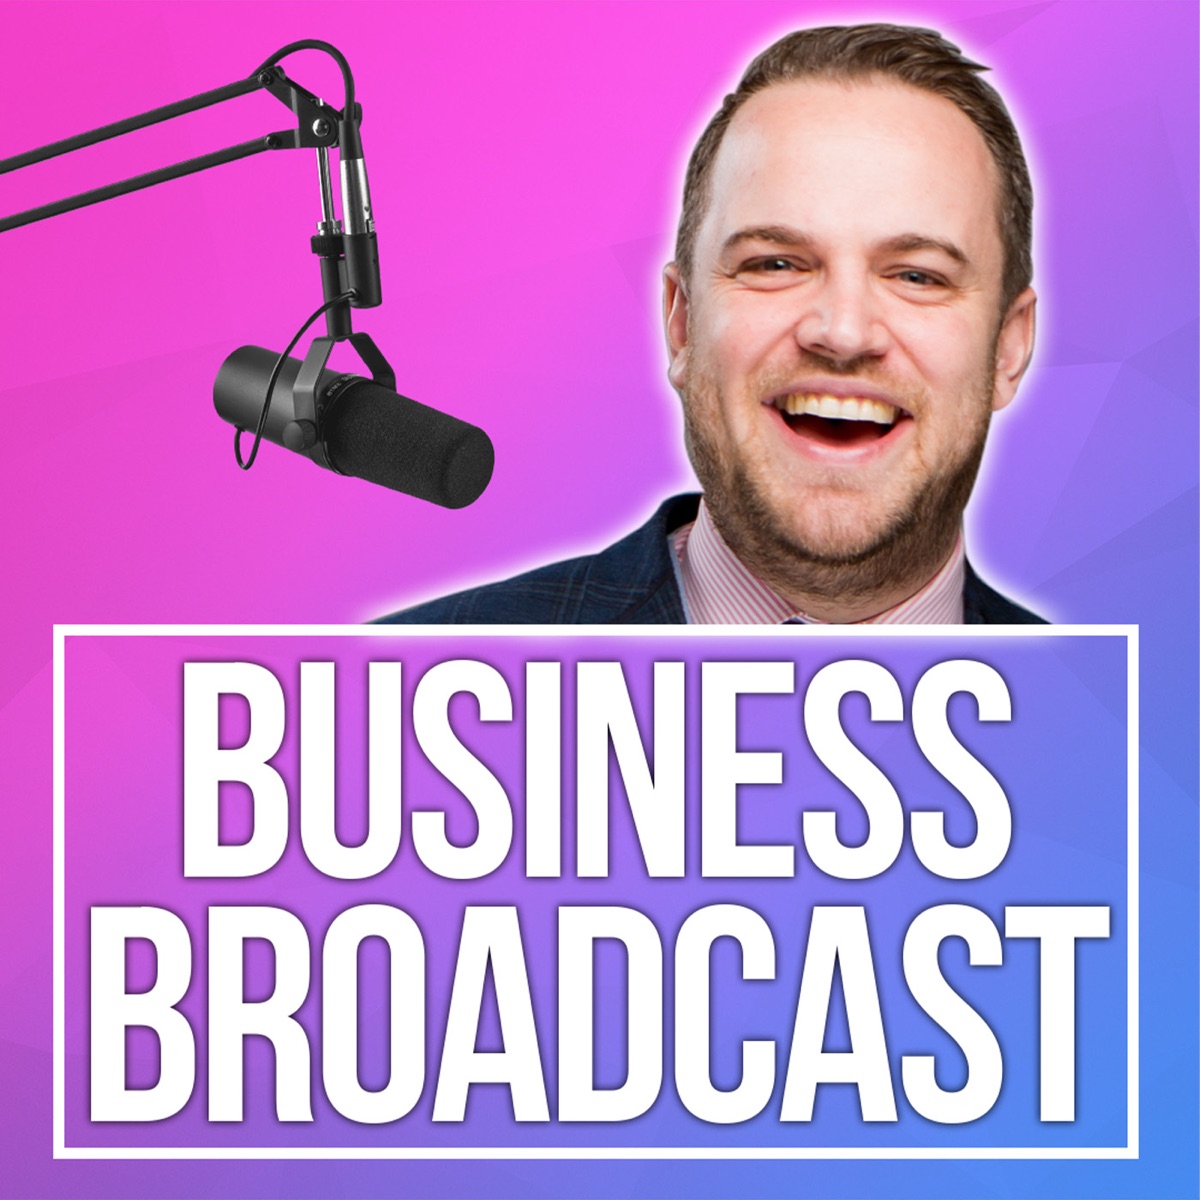 James Sinclairs Business Broadcast Podcast Uk Podcasts 8245